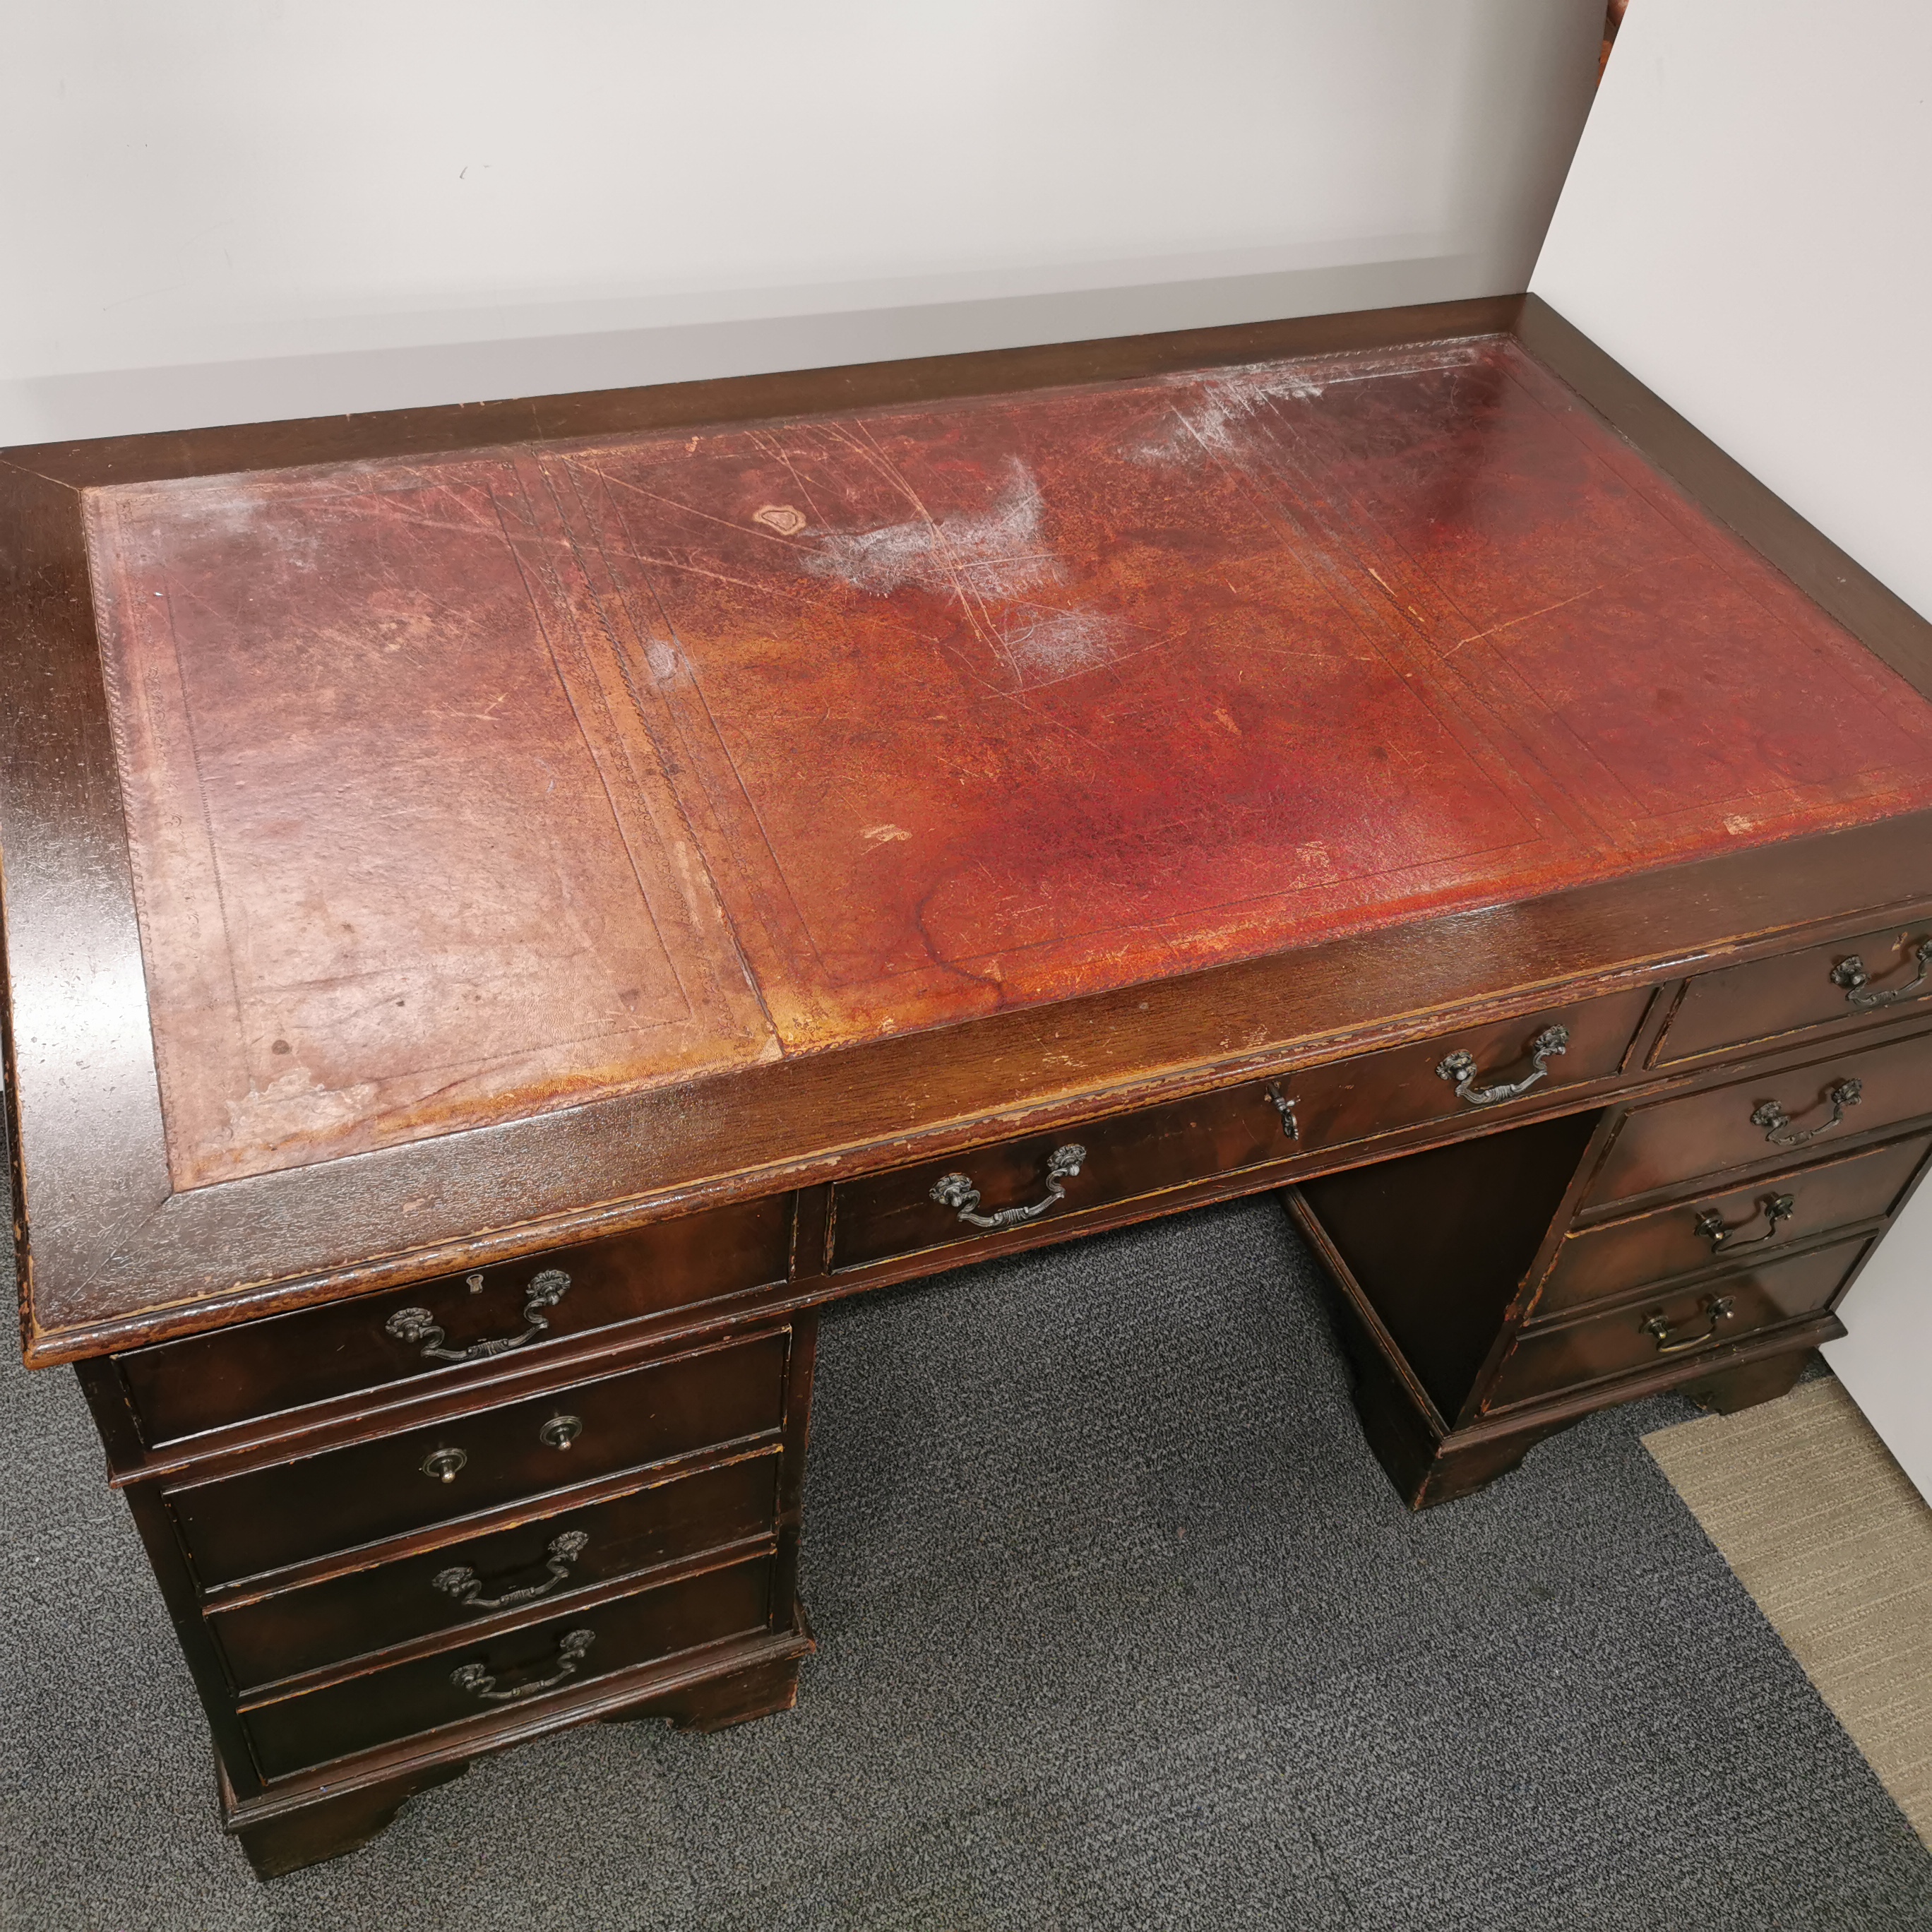 A mahogany eight drawer leather topped, knee hole desk, 155 x 90 x 77cm. - Image 2 of 4